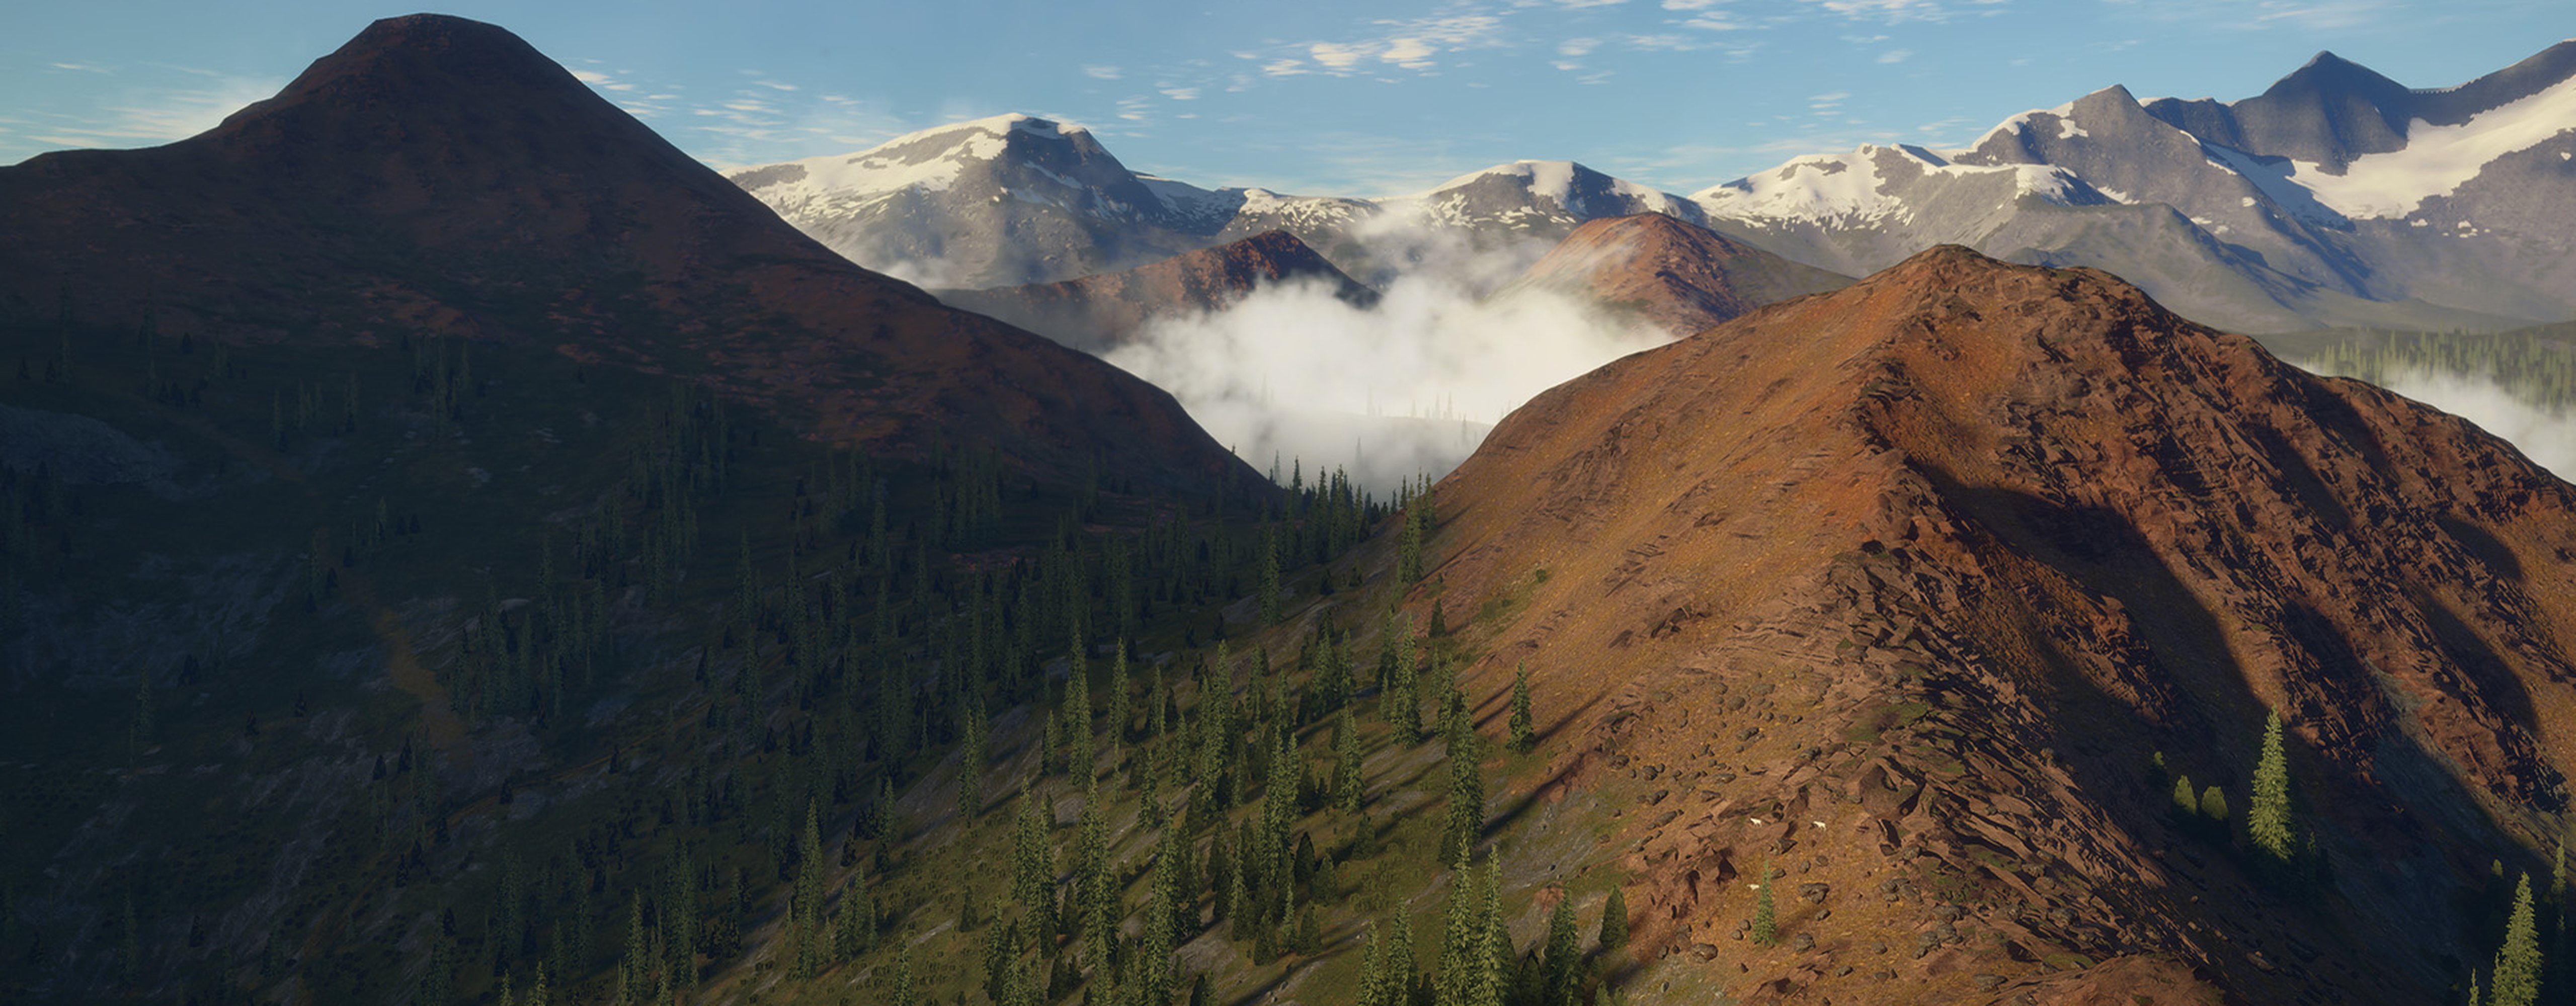 Overlooking the mountain ranges or Silver Ridge Peaks Reserve in theHunter: Call of the Wild.